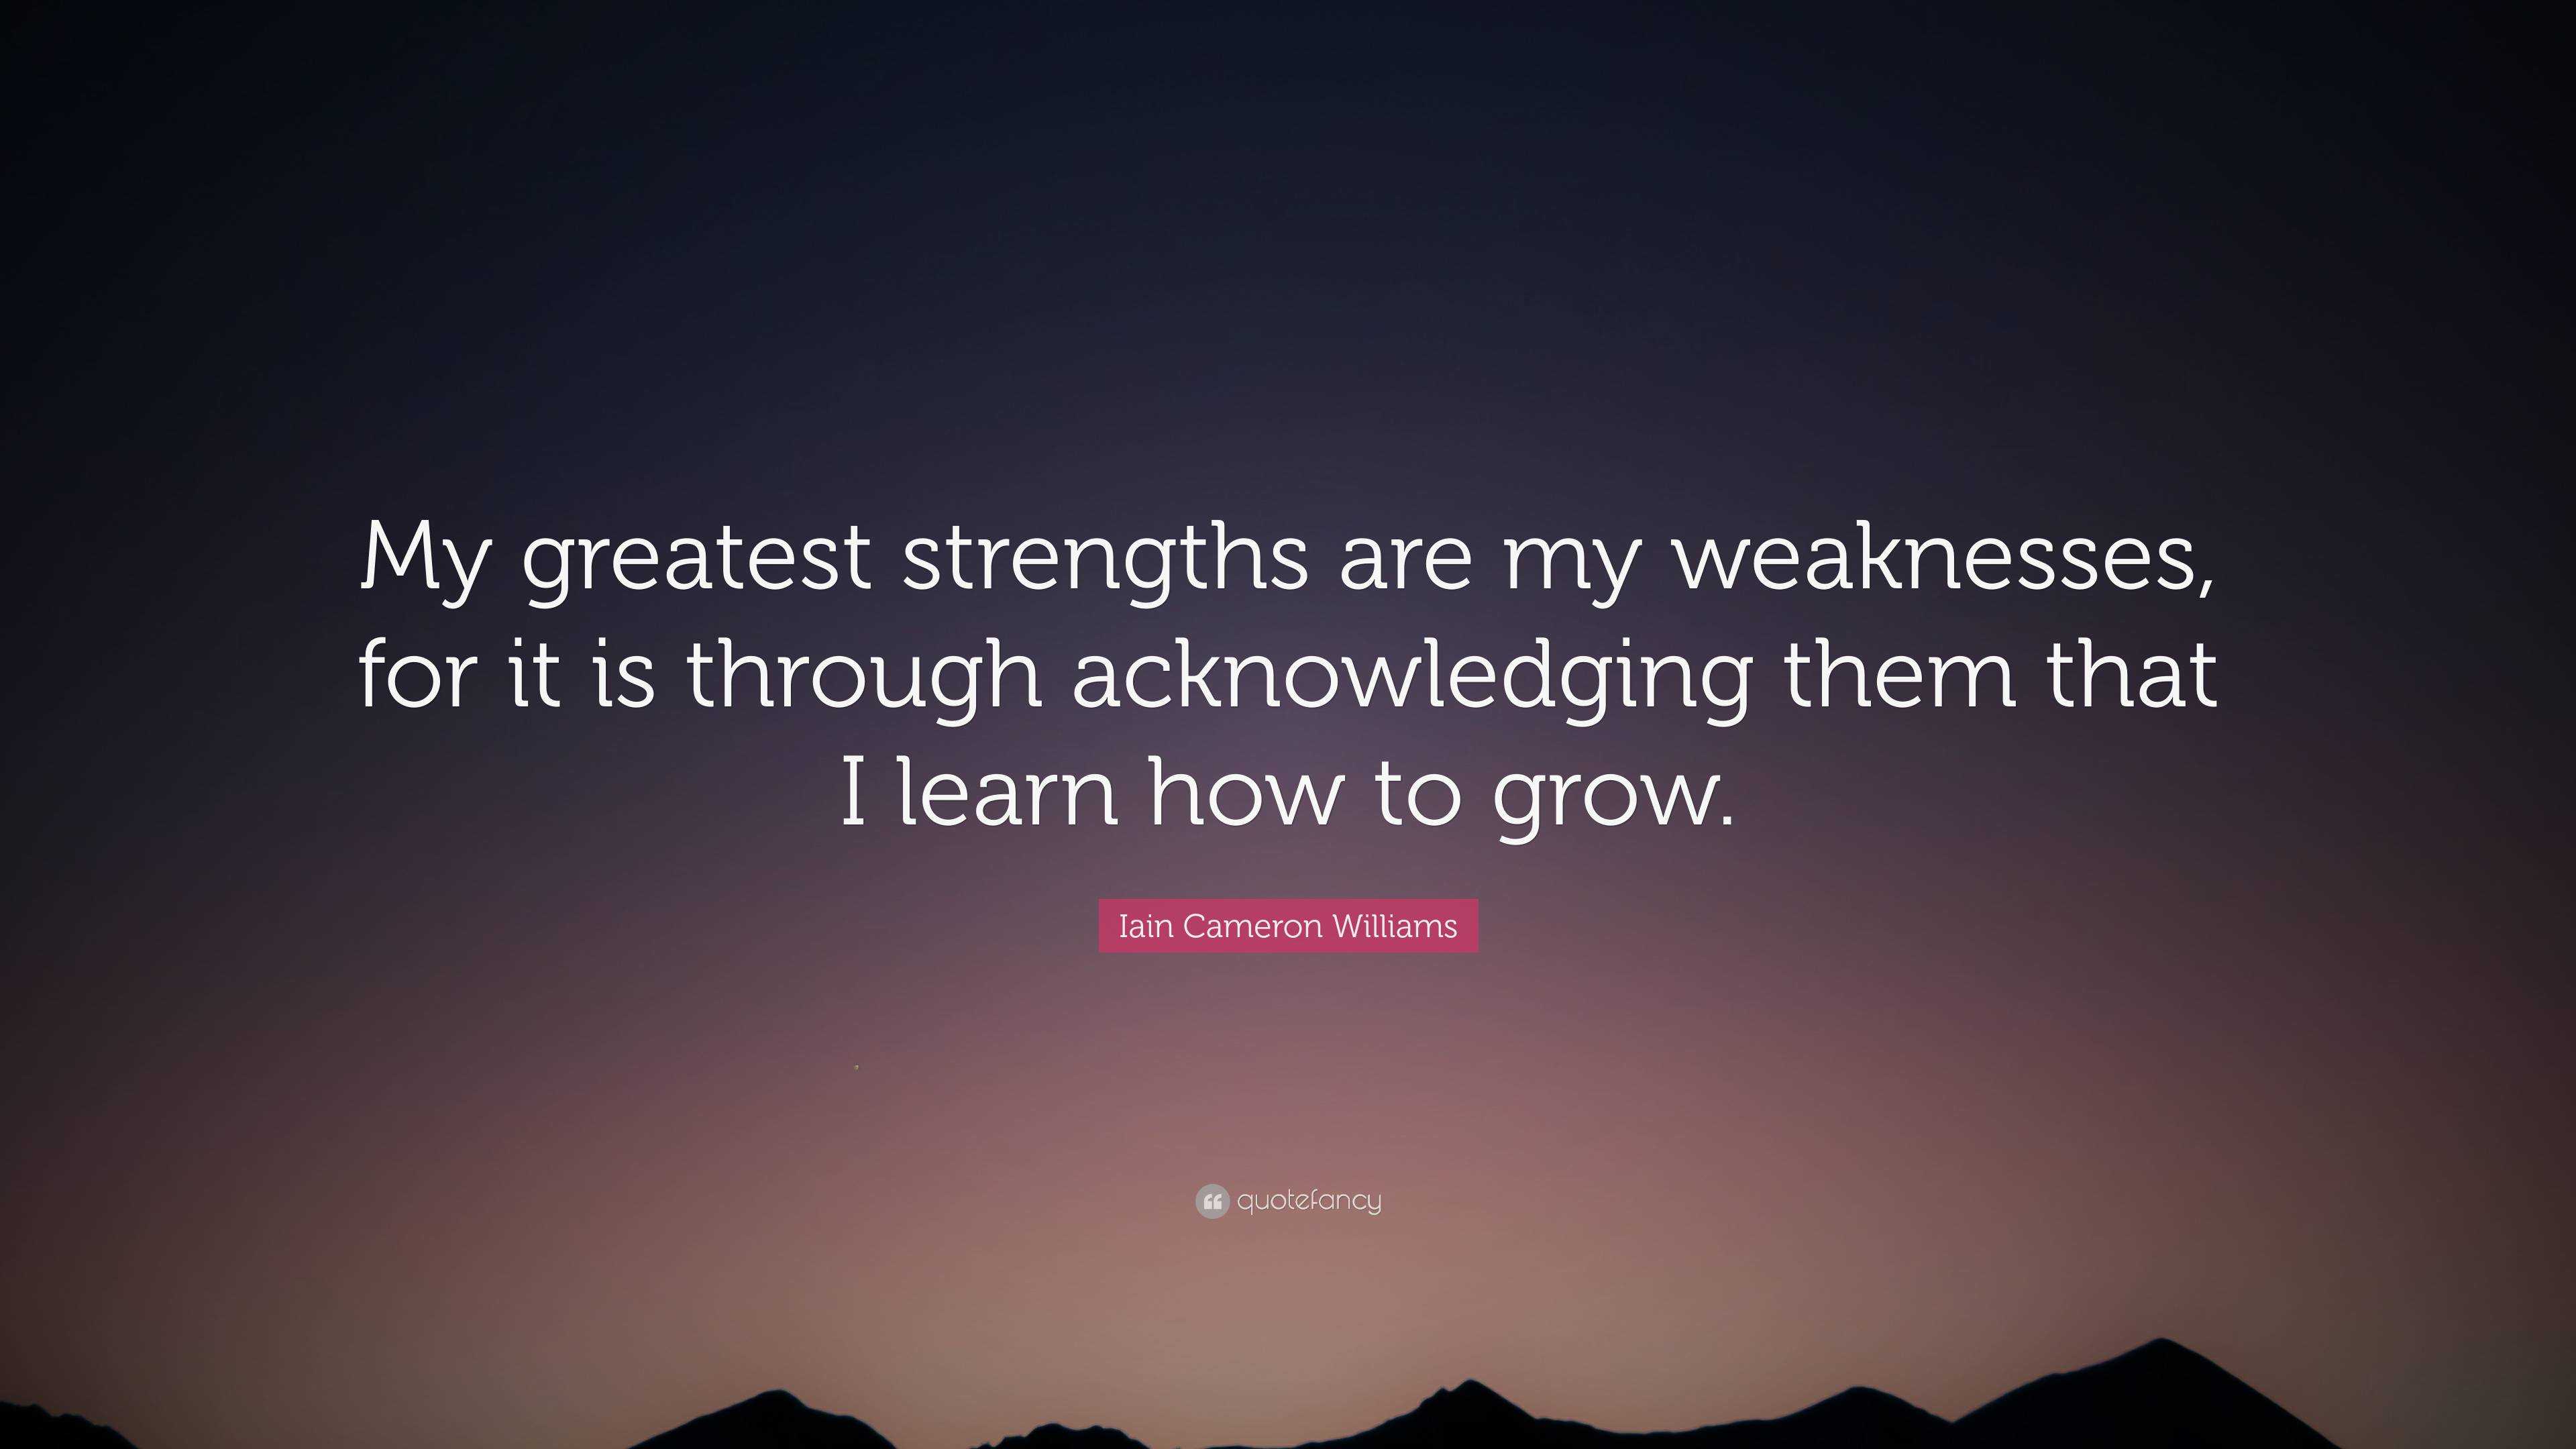 Iain Cameron Williams Quote: “My greatest strengths are my weaknesses ...